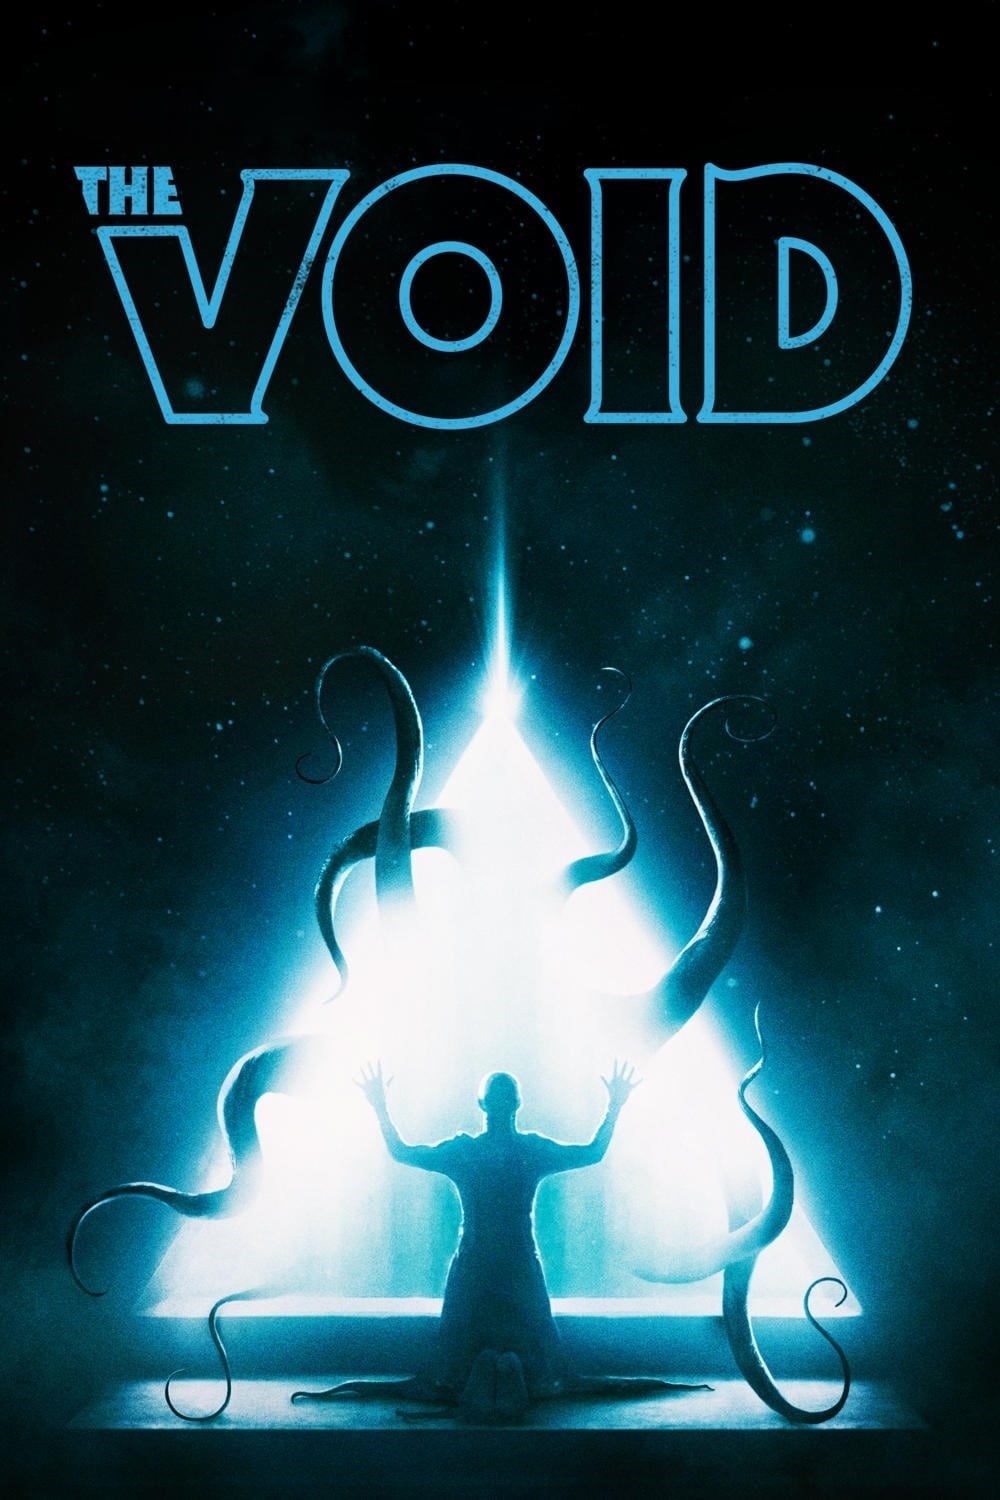 The void - 2016